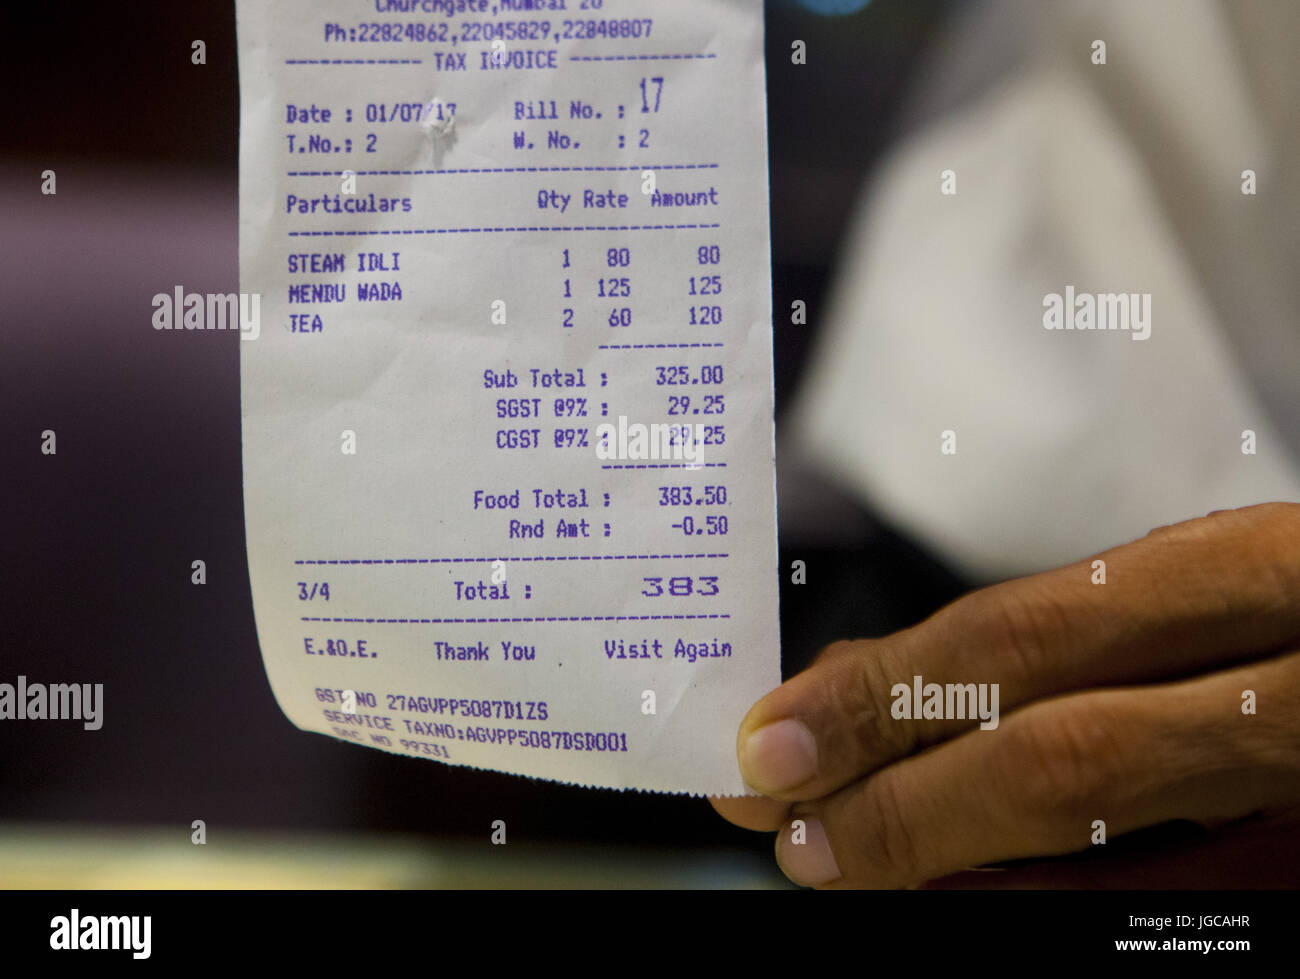 Mumbai, Maharashtra, India. 1st July, 2017. 1 July 2017 : Mumbai - INDIA.A waiter shows the New Tax invoice for food which includes 18% GST tax.As a result of GST Restaurant food has become expensive.The new GST tax, designed to replace India's labyrinth of various levies found across the country's states with a uniform system and unite India into a single market, was launched by the country's prime minister Narendra Modi in a special session of parliament in New Delhi at the stroke of midnight 30 June 2017. Credit: Subhash Sharma/ZUMA Wire/Alamy Live News Stock Photo